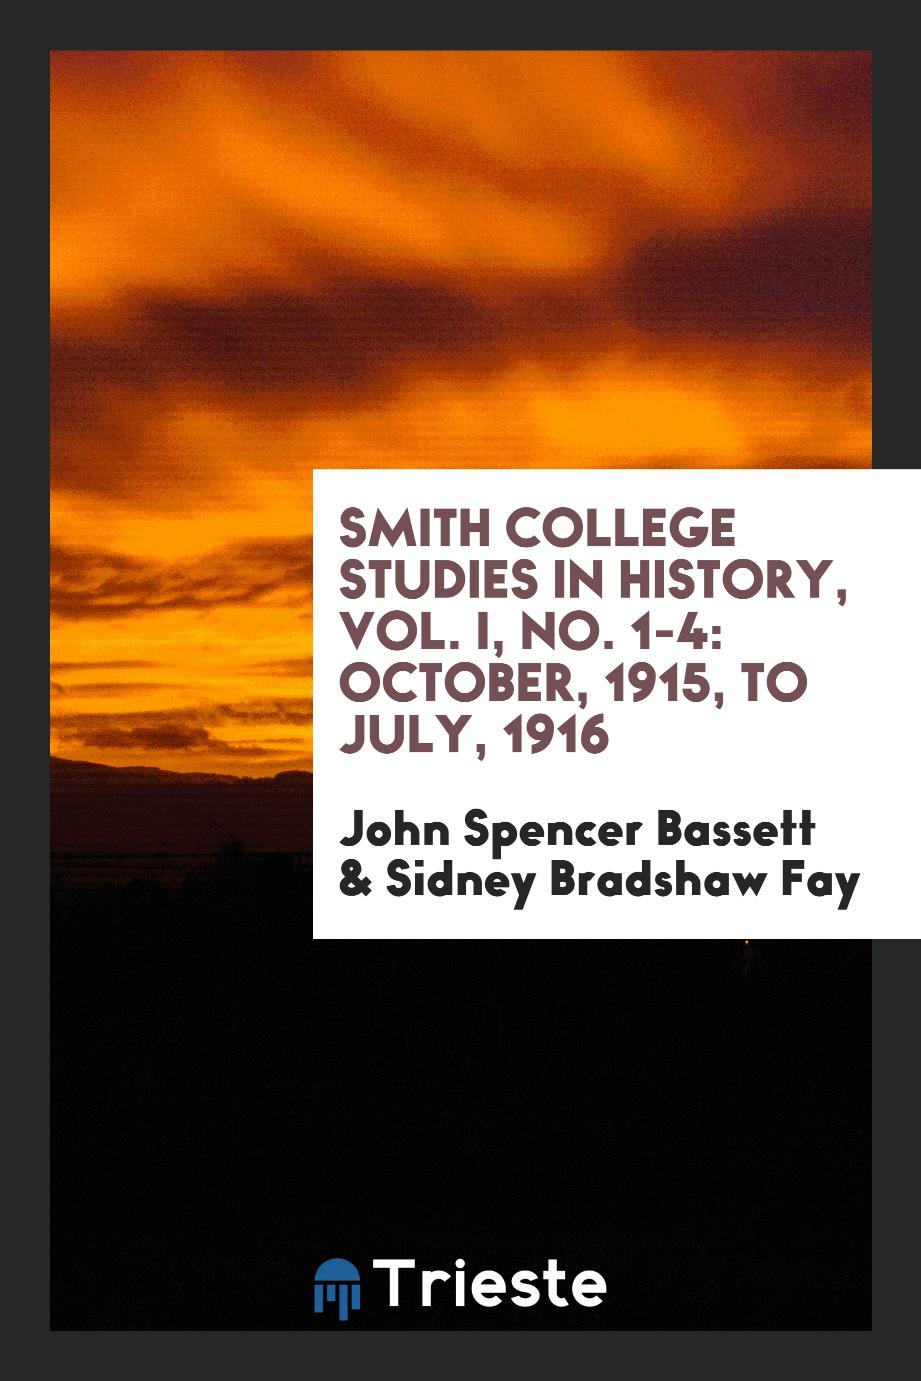 Smith college studies in history, Vol. I, No. 1-4: october, 1915, to july, 1916